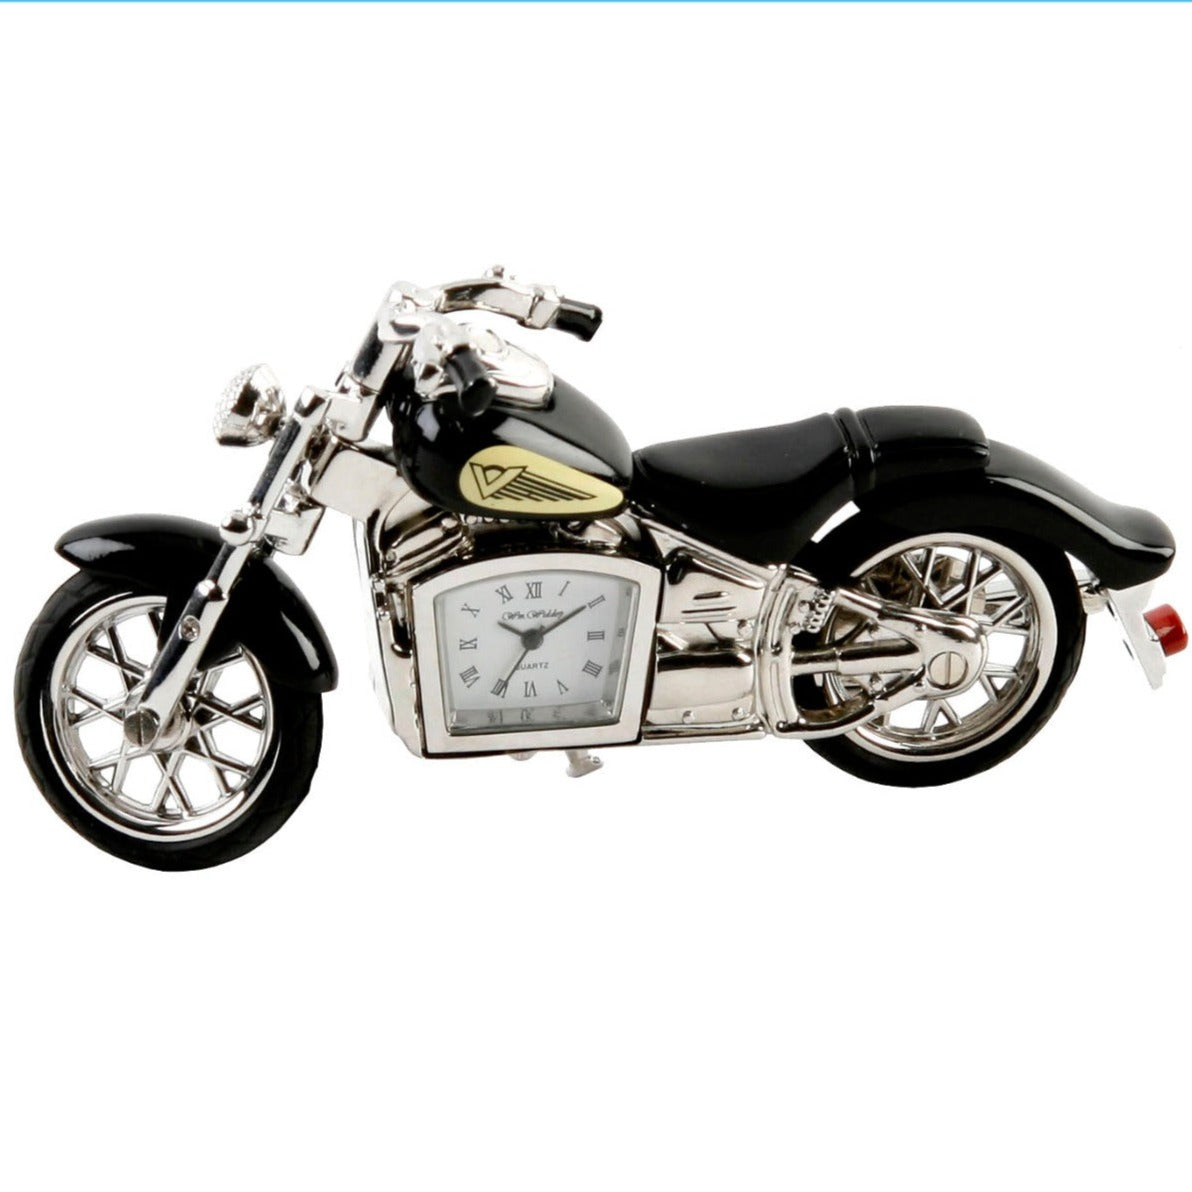 Indian Motorbike Miniature Clock Black by William Widdop  Bring a unique and quirky touch to the home with this stylish miniature clock made with great attention to detail.  The miniature motorbike clock is a great gift for someone who loves iconic motorbikes.